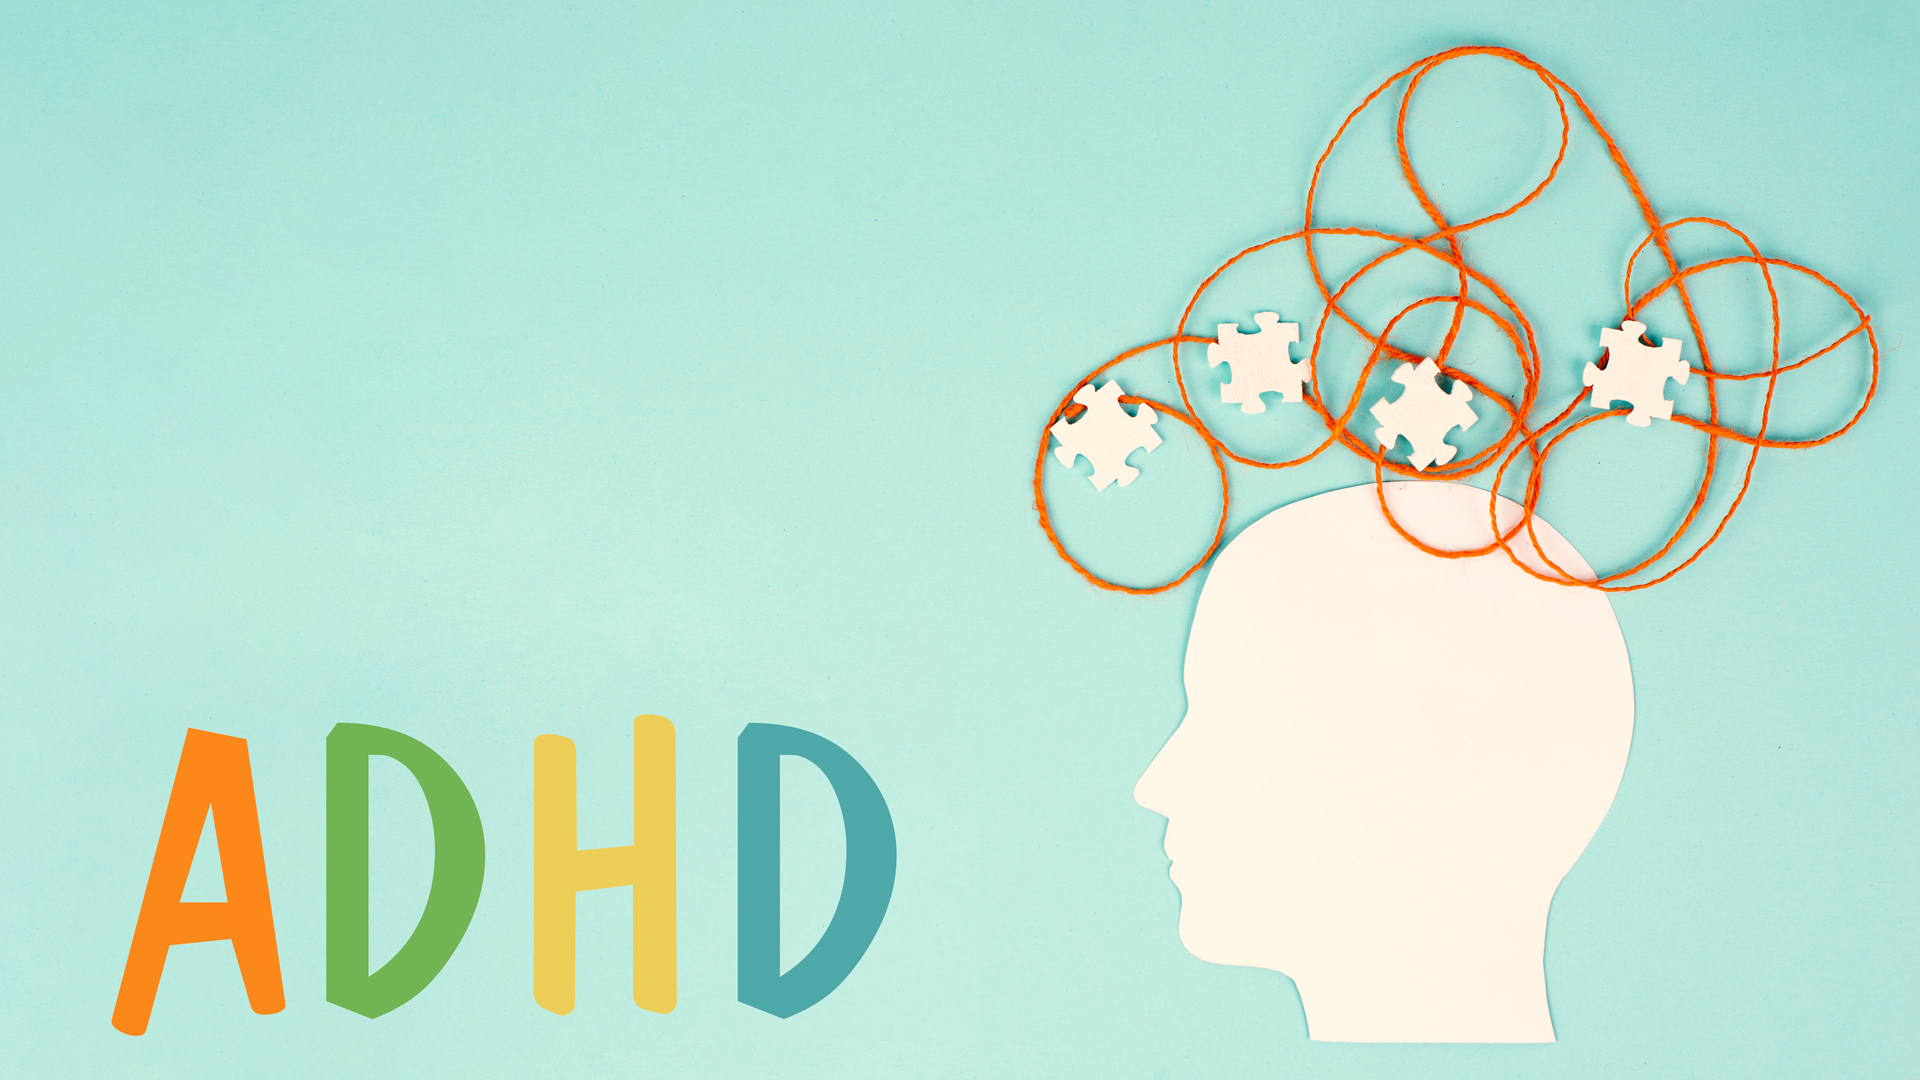 Creating an ADHD-friendly workplace